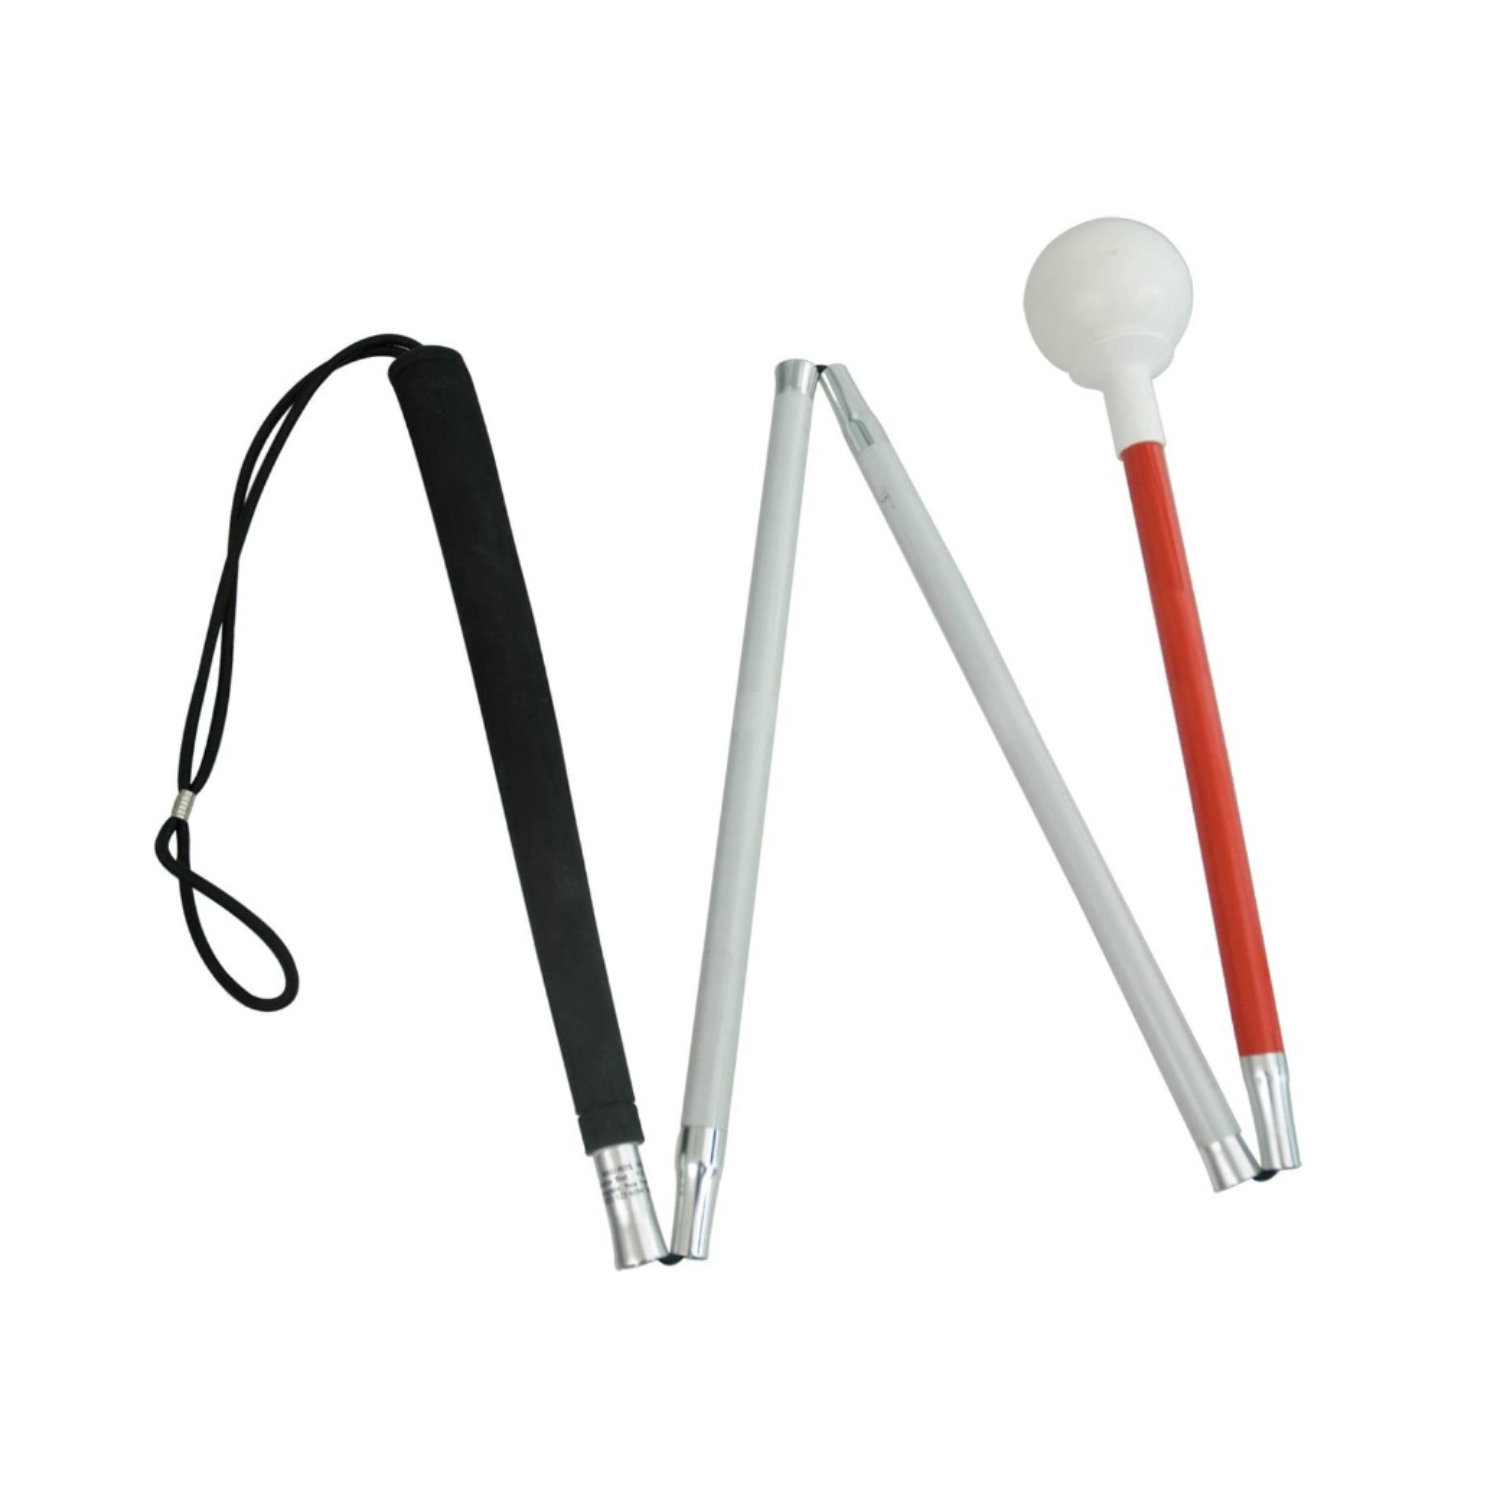 Mobility Canes for the Visually Impaired